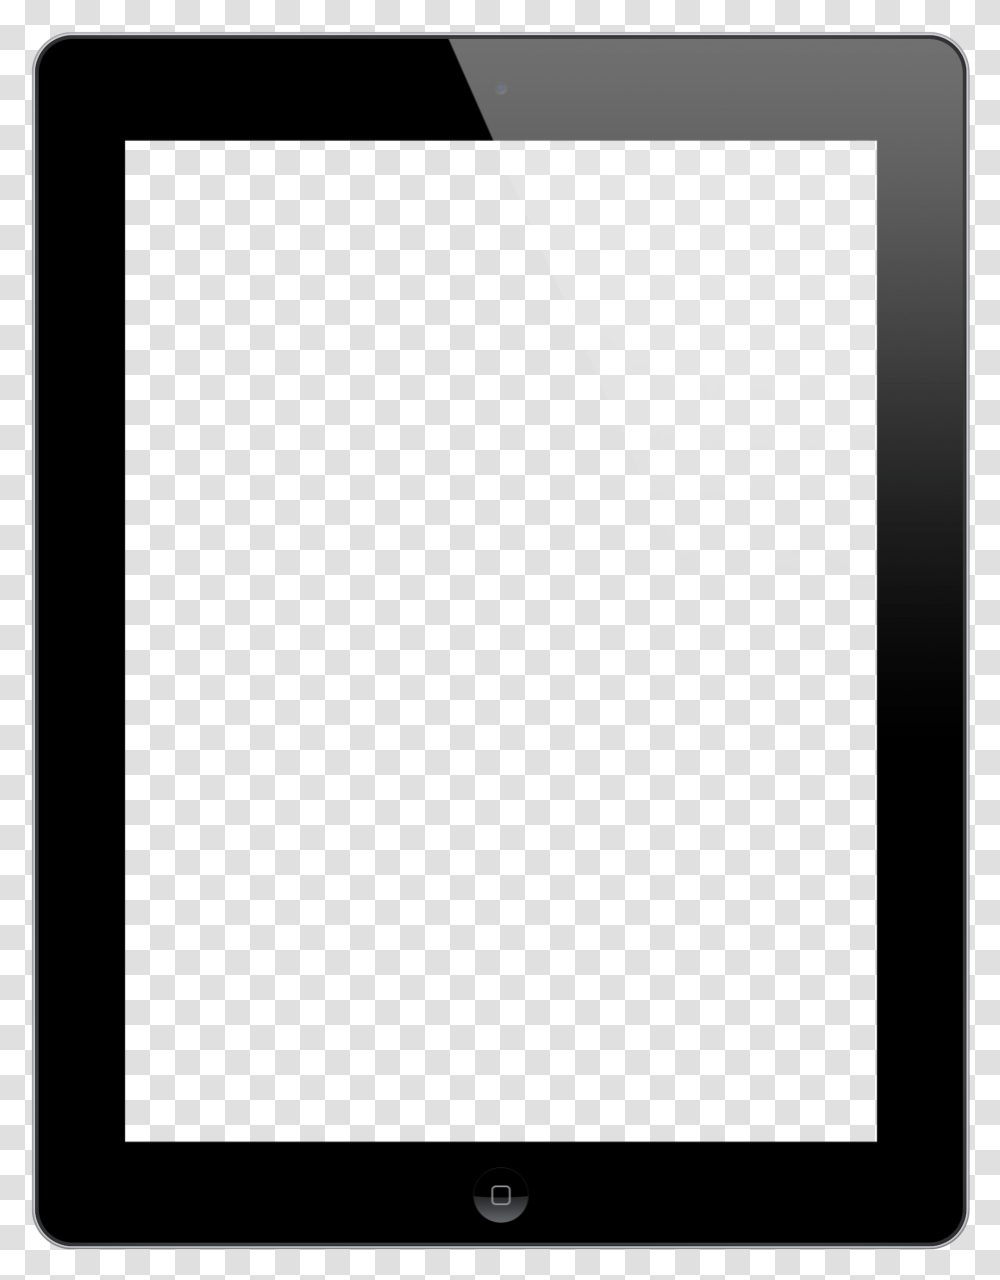 Download Ipad Tablet Image Blank Check Box, Silhouette, Mobile Phone, Electronics, Cell Phone Transparent Png